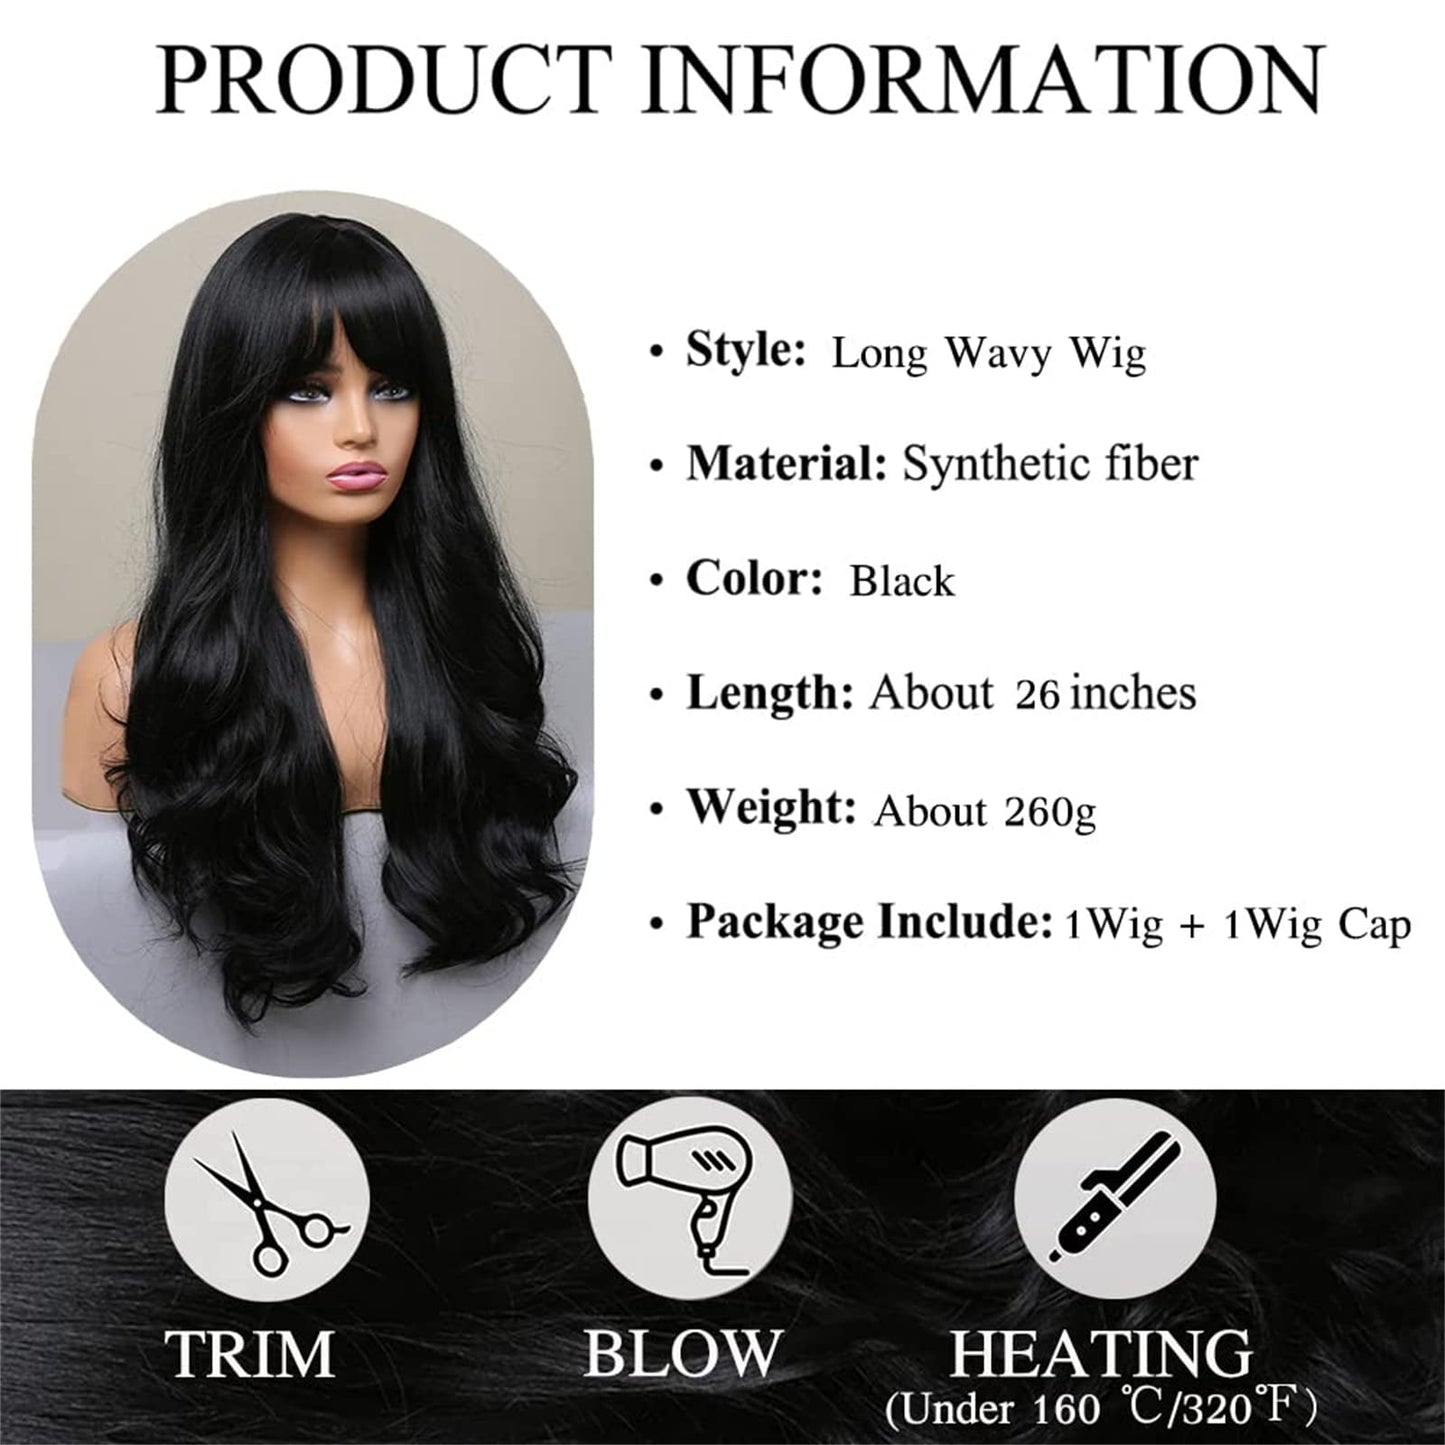 Arabest Long Wave Wigs with Bangs, Natural Curly Wavy Hair Black Color Synthetic Wigs with Neat Bangs, Can Modify Heat Resistant Weave Wigs, Women Wigs for Daily Party Cosplay